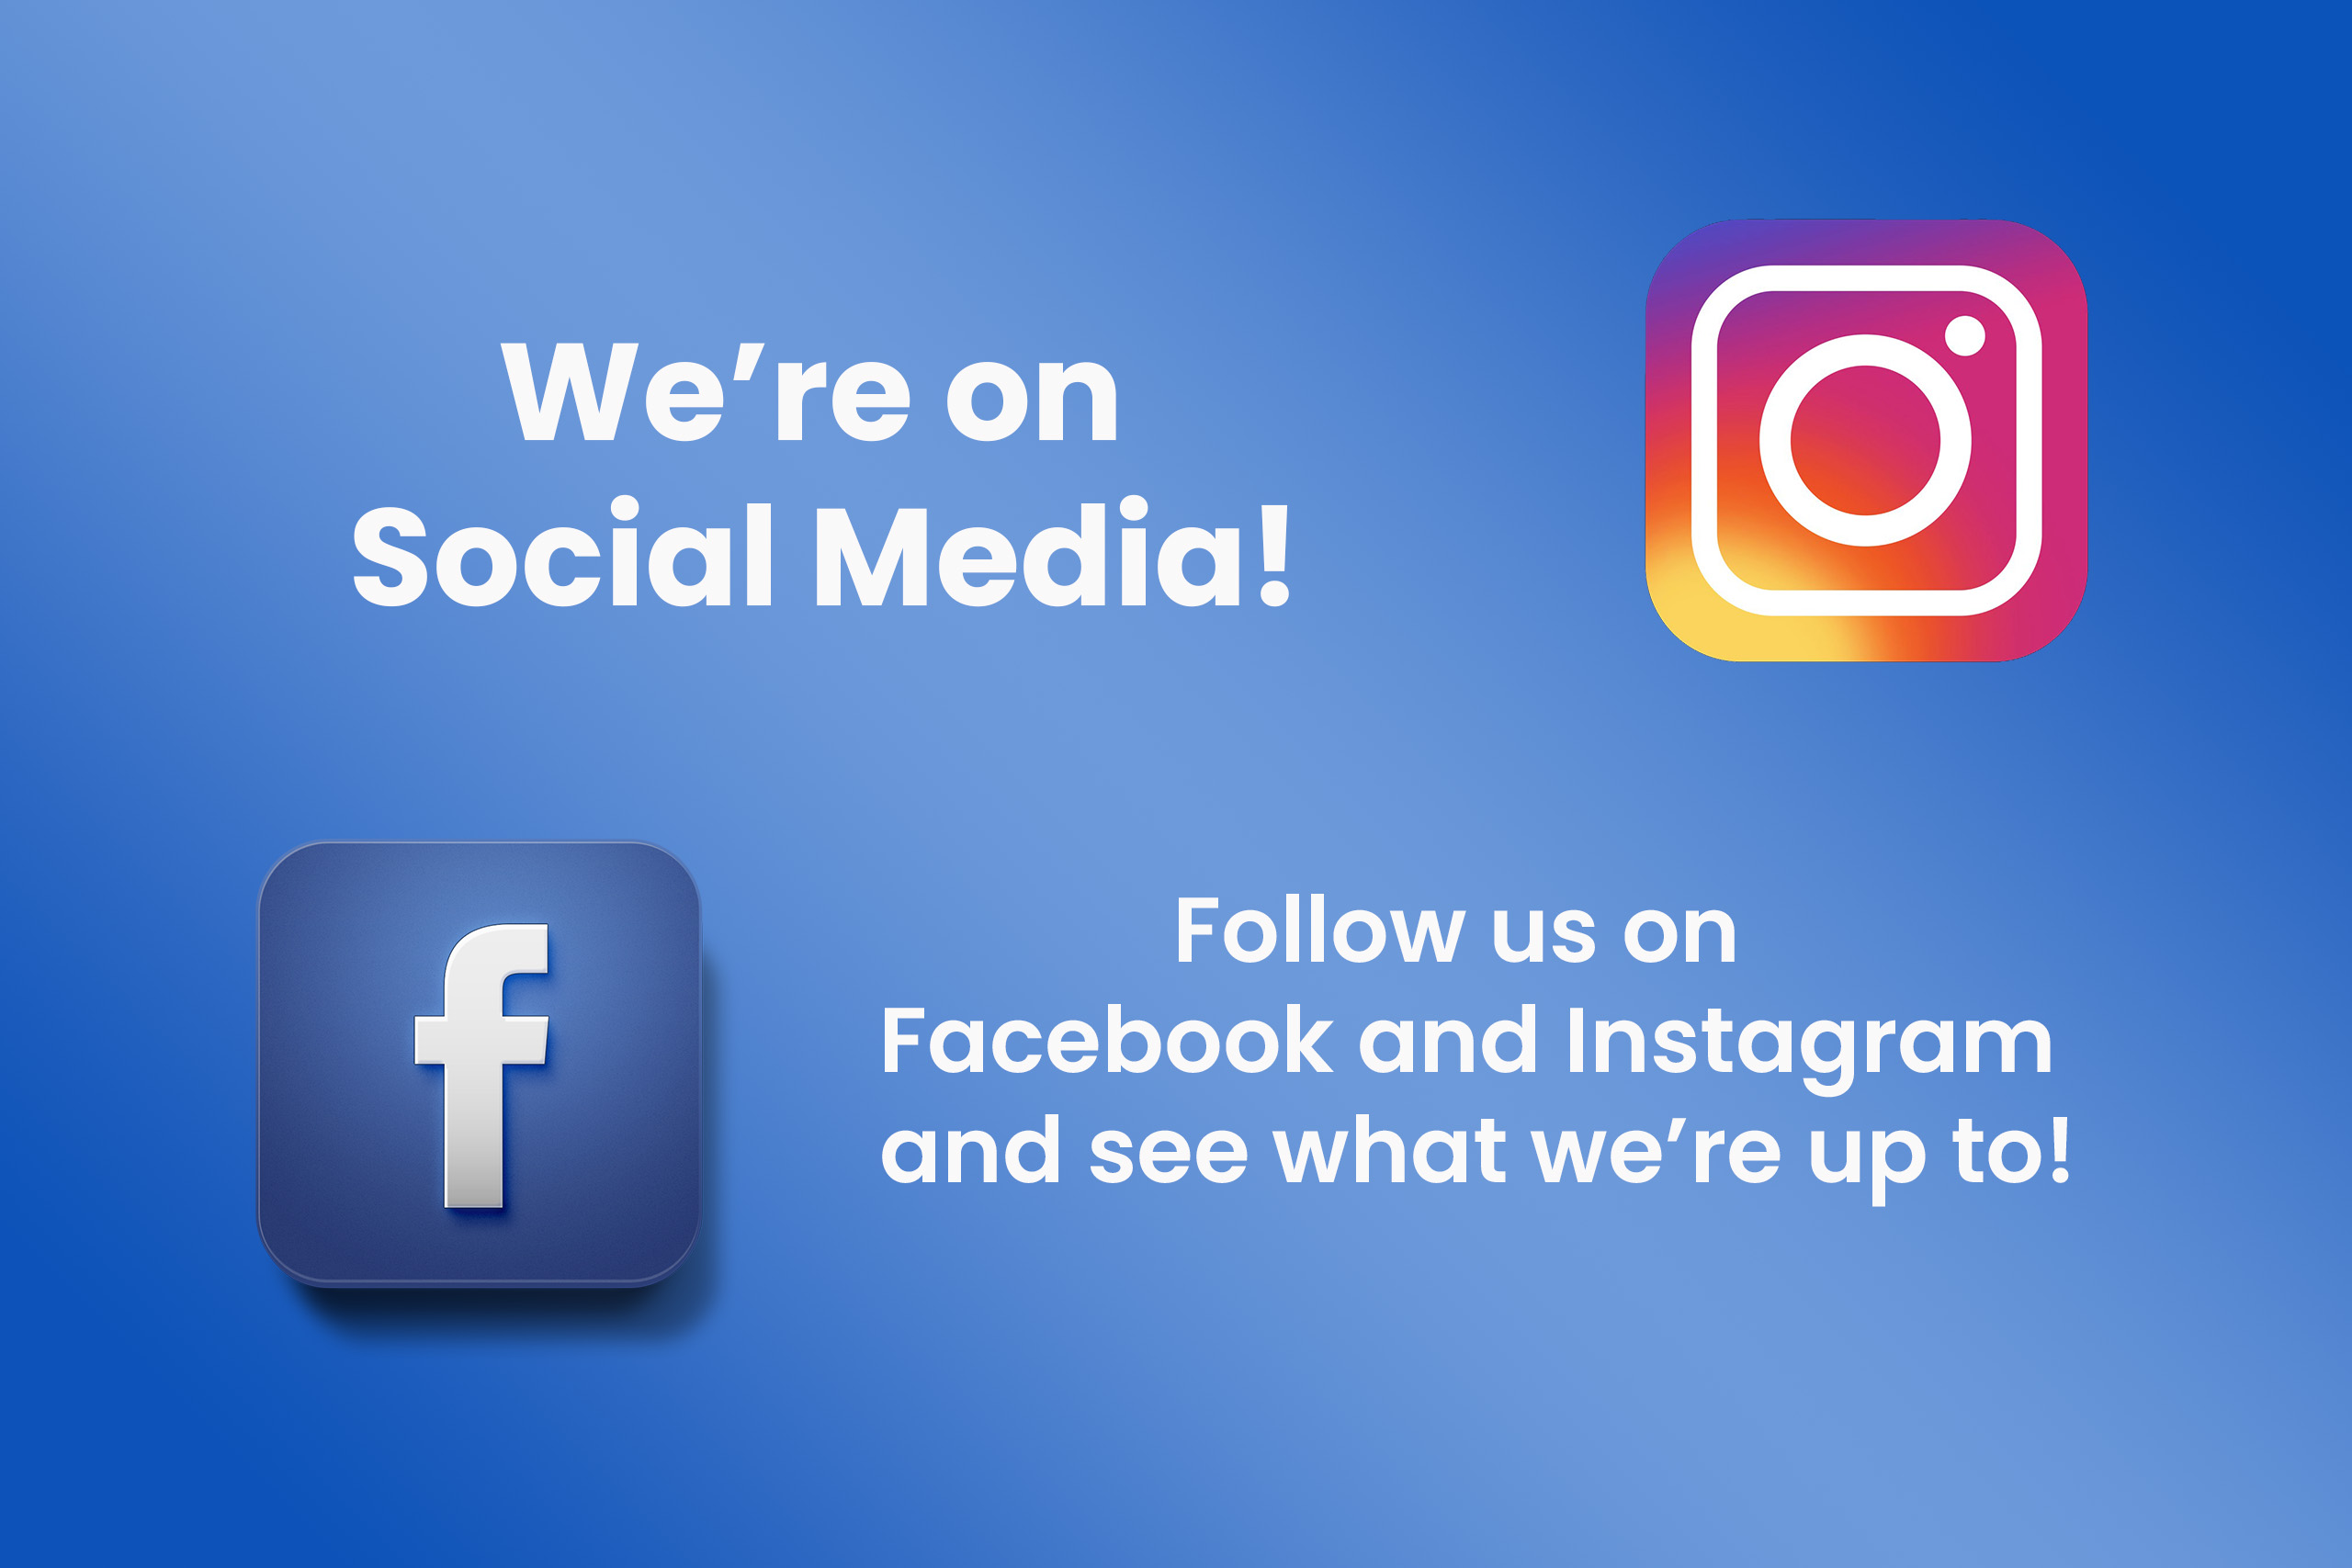 We are on Social Media!